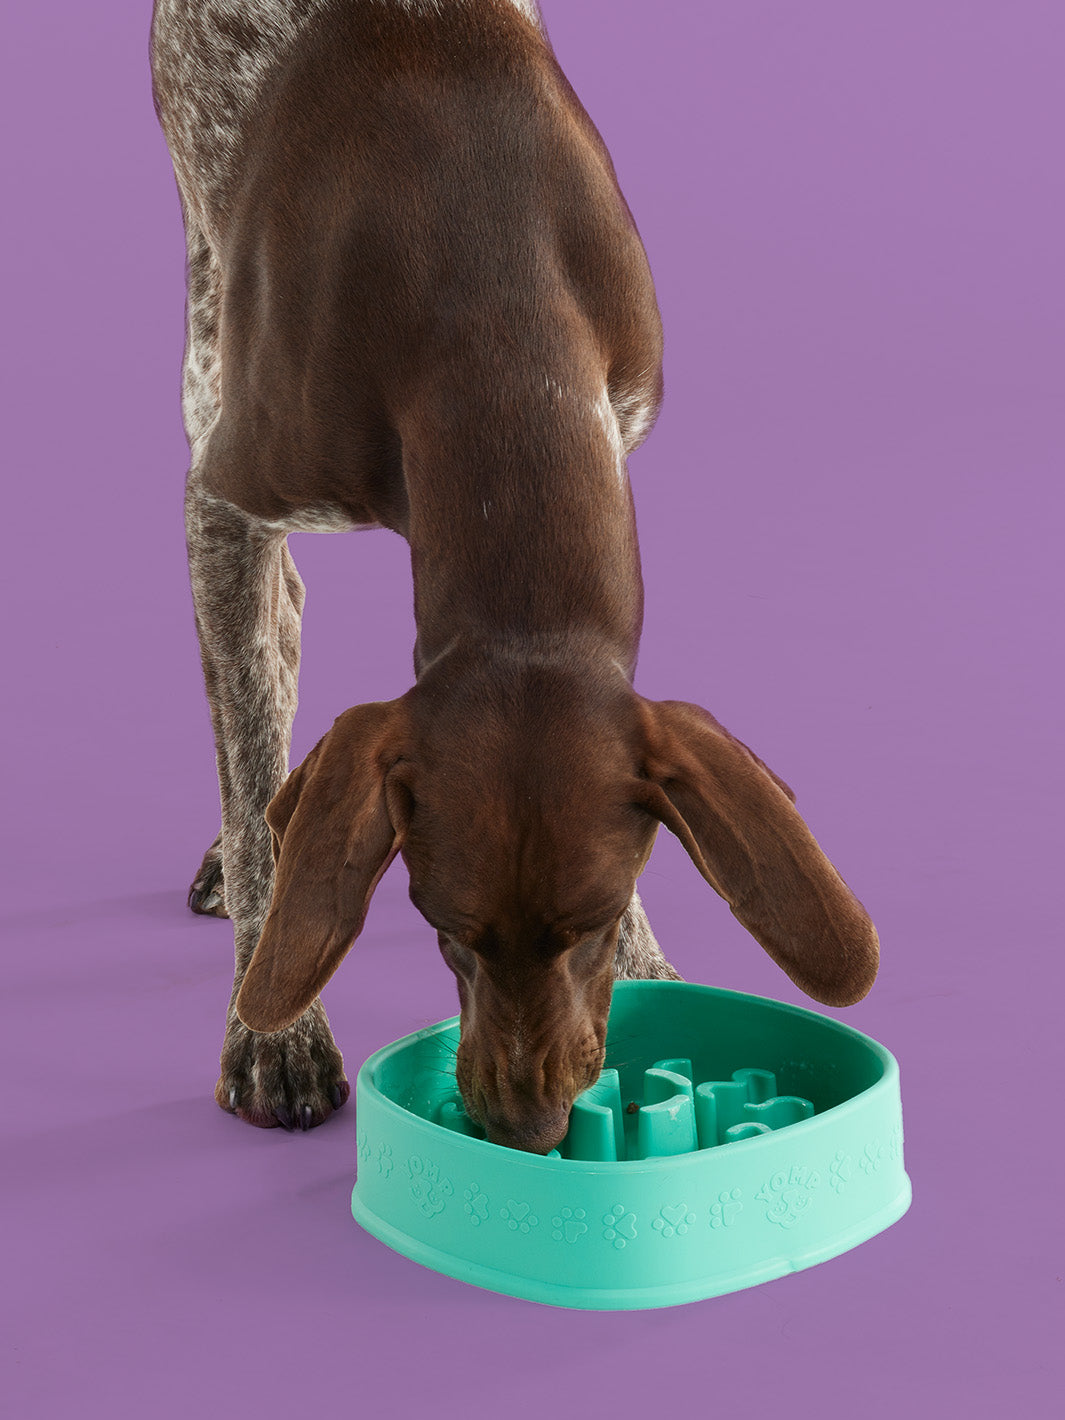 The Puzzle Feeder Puzzle Feeder™ / Dog Bowl for Eating Habit